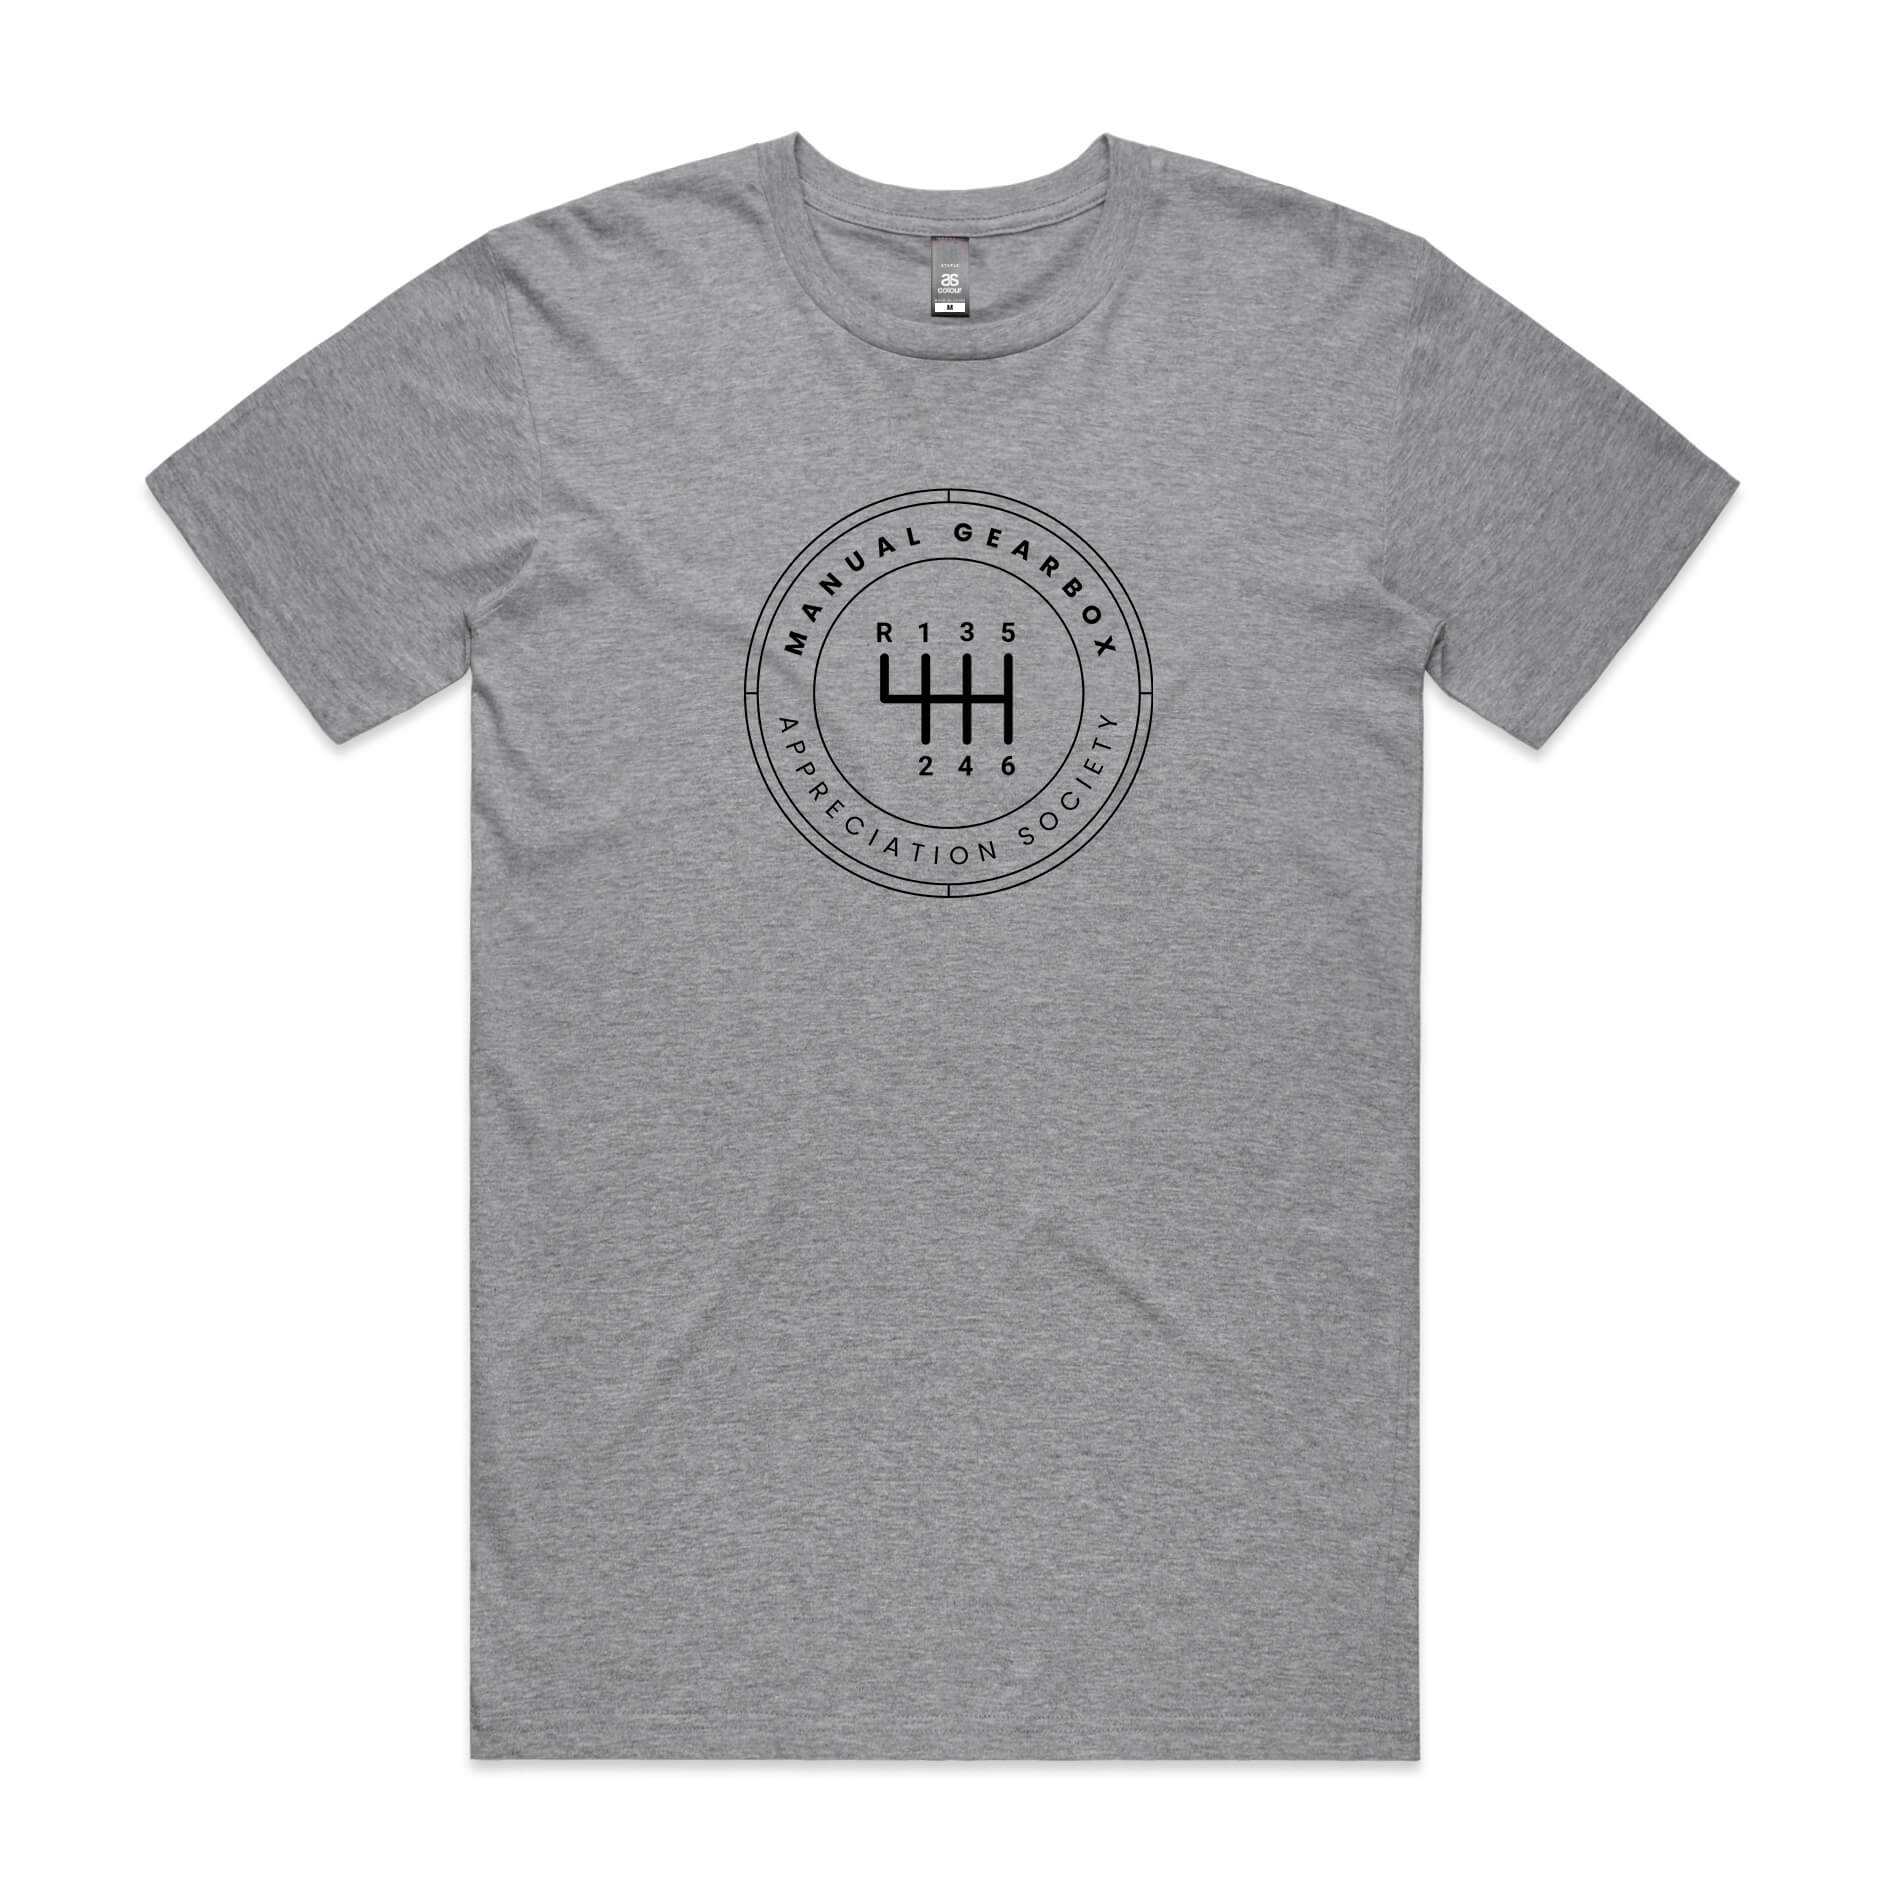 Manual gearbox t-shirt in grey marle